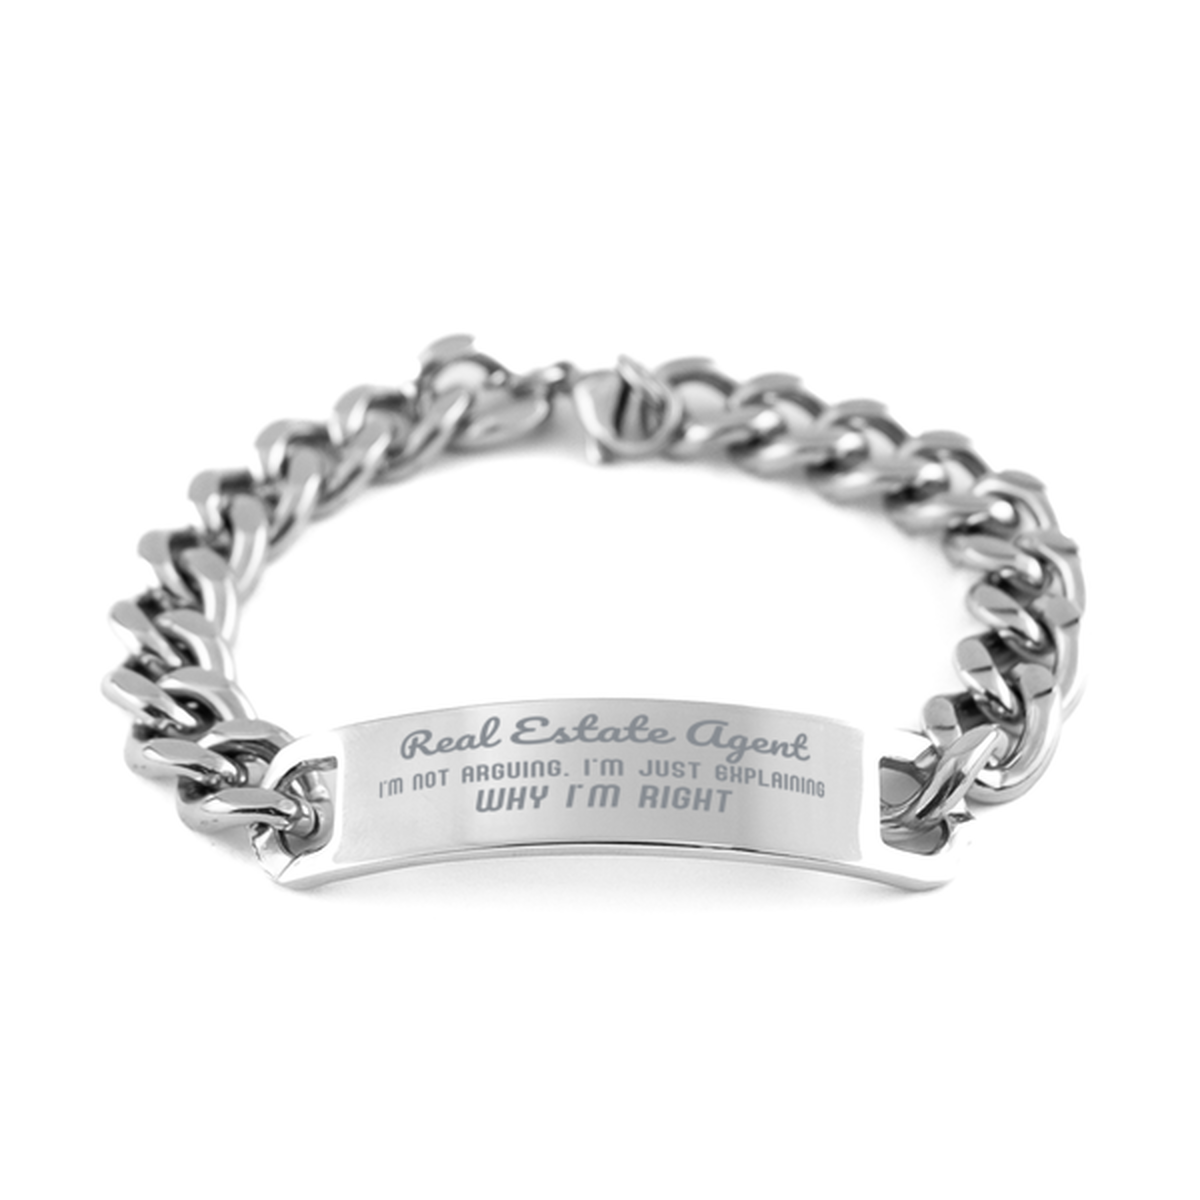 Real Estate Agent I'm not Arguing. I'm Just Explaining Why I'm RIGHT Cuban Chain Stainless Steel Bracelet, Graduation Birthday Christmas Real Estate Agent Gifts For Real Estate Agent Funny Saying Quote Present for Men Women Coworker